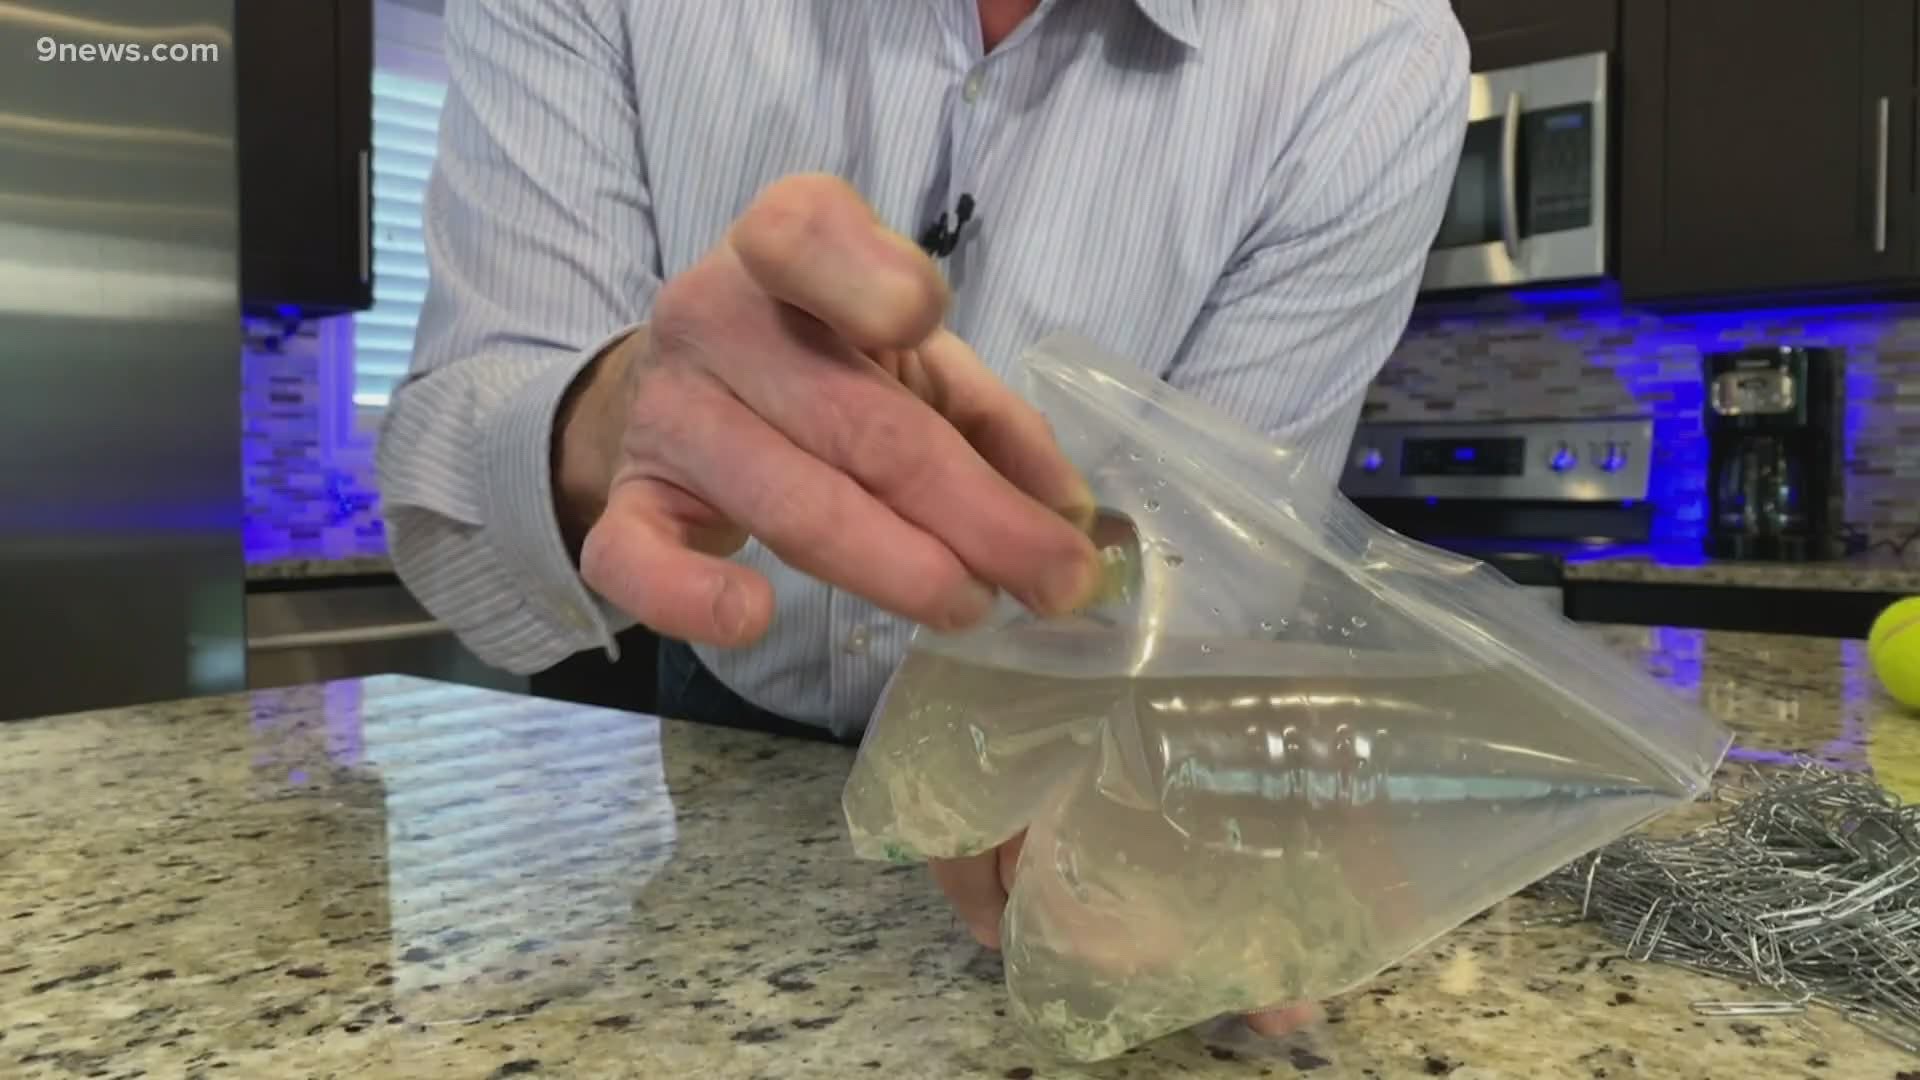 Steve Spangler shares a clever way to uncover hidden iron in an ordinary dollar bill.